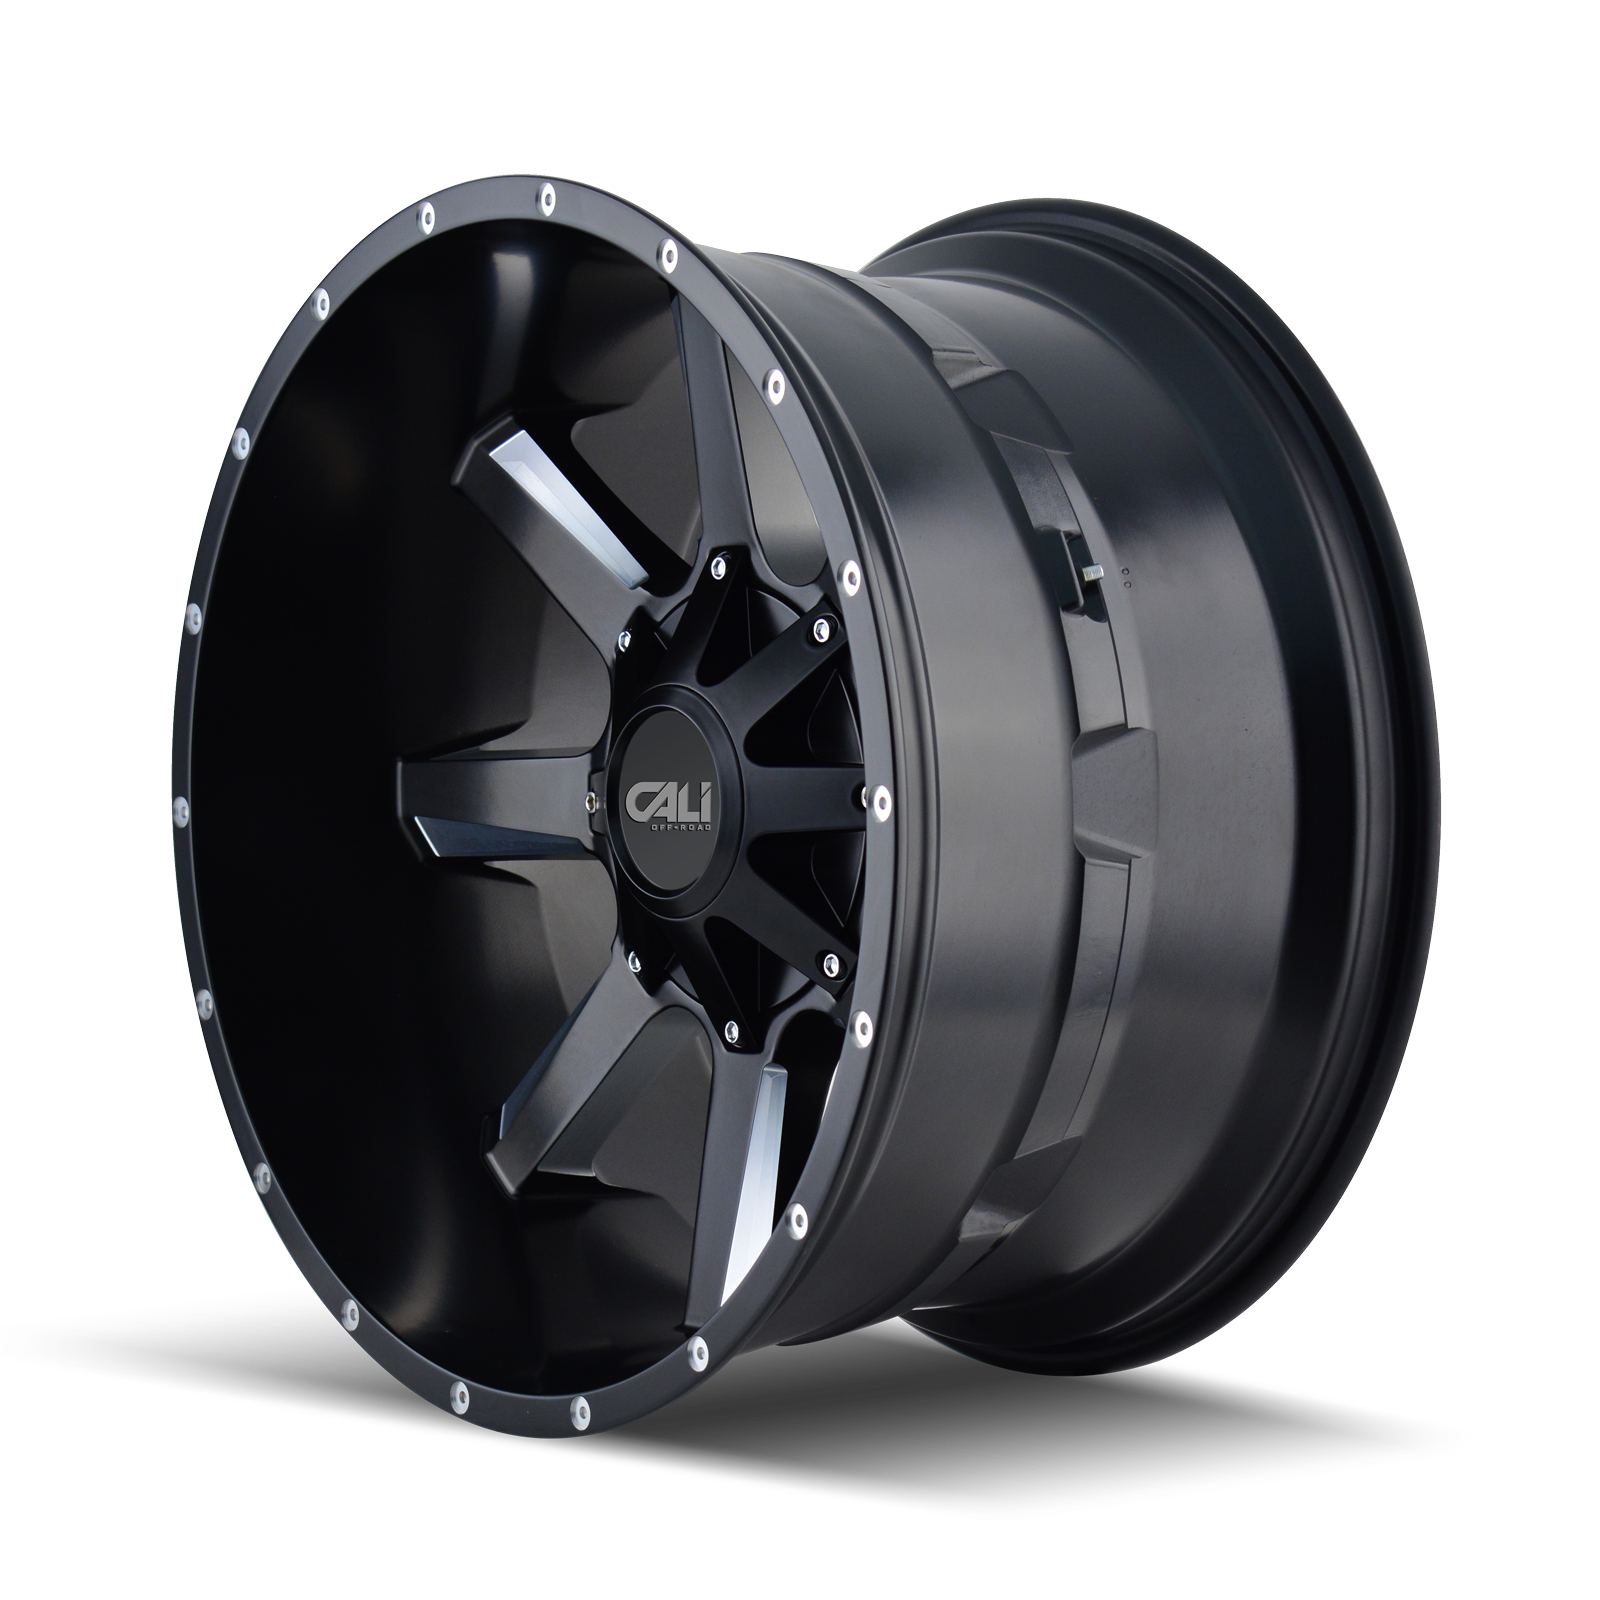 Cali Off-road BUSTED Satin black milled 20x9 +18 8x180mm 124.1mm